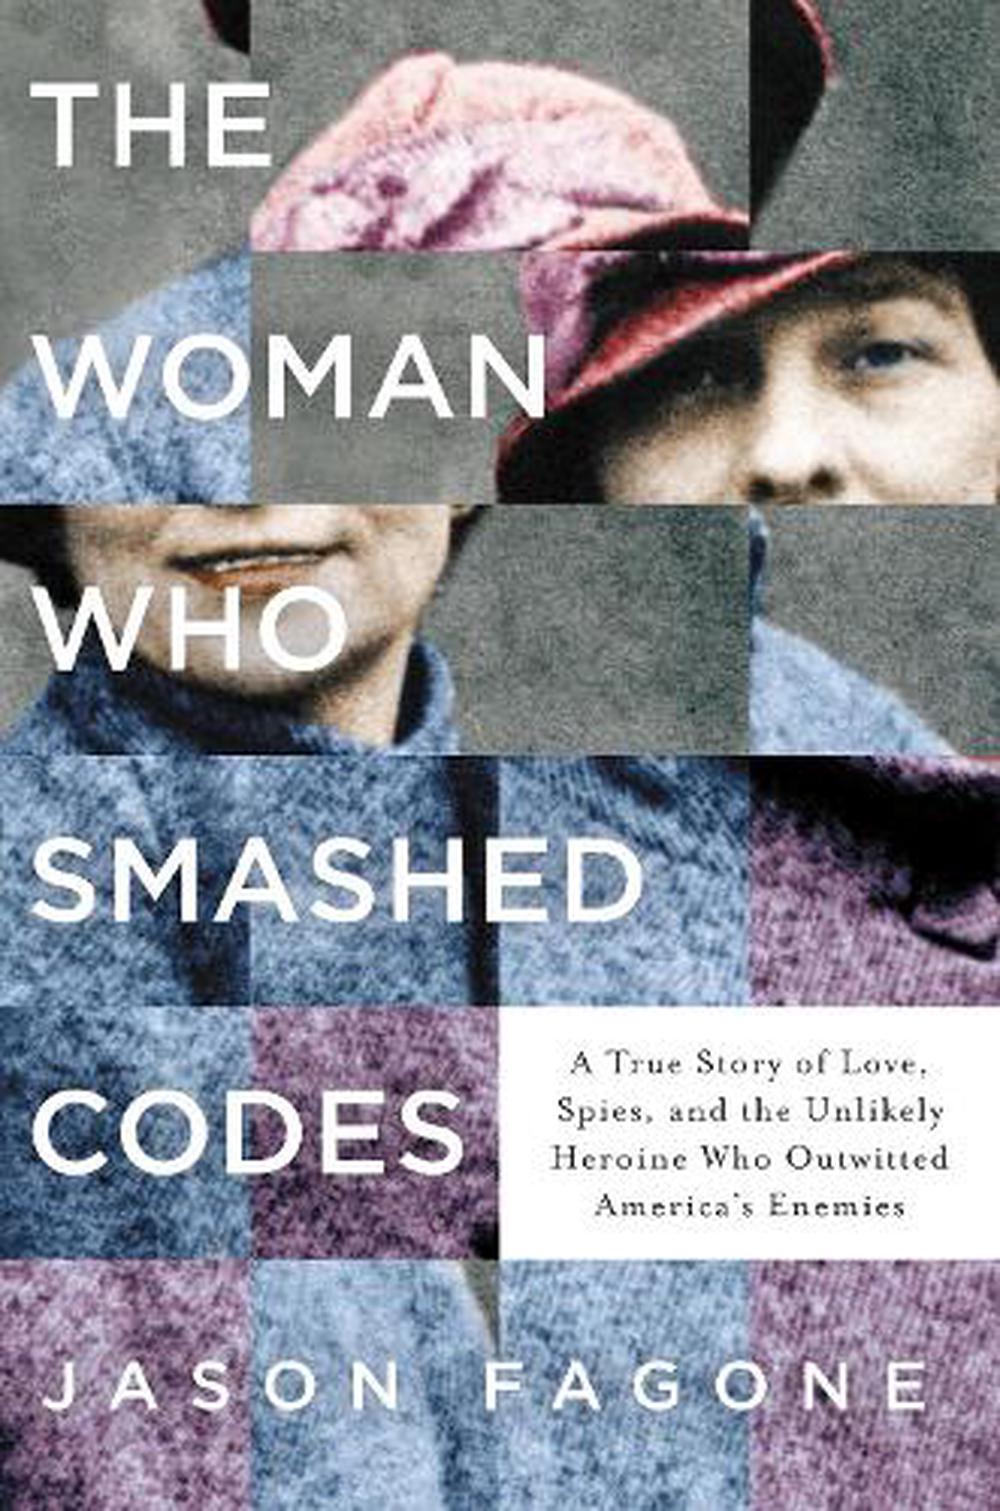 the woman who smashed codes review